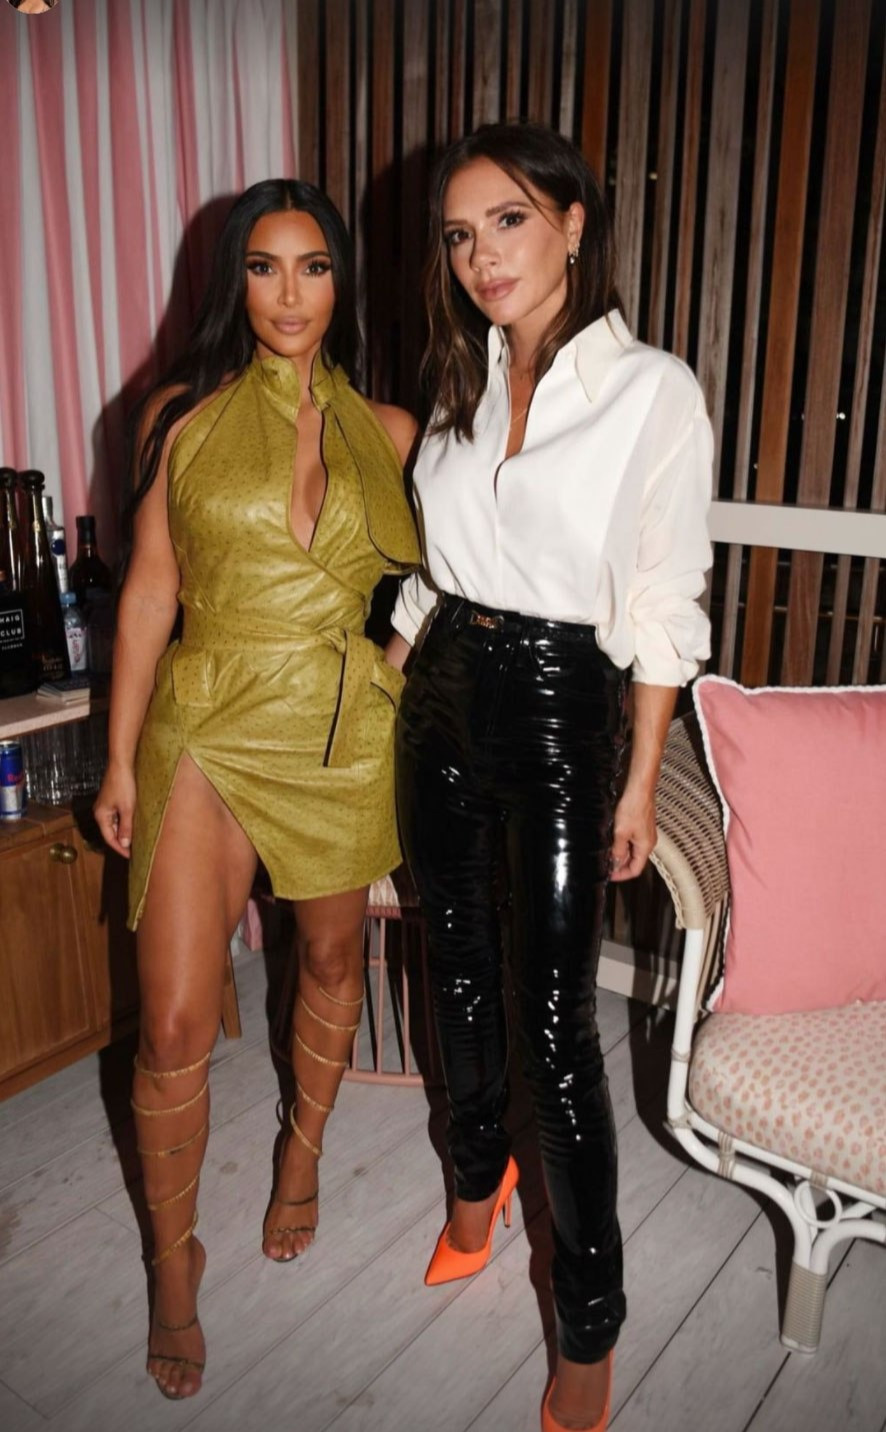 The TV personality spent time celebrating Victoria Beckham's 47th birthday